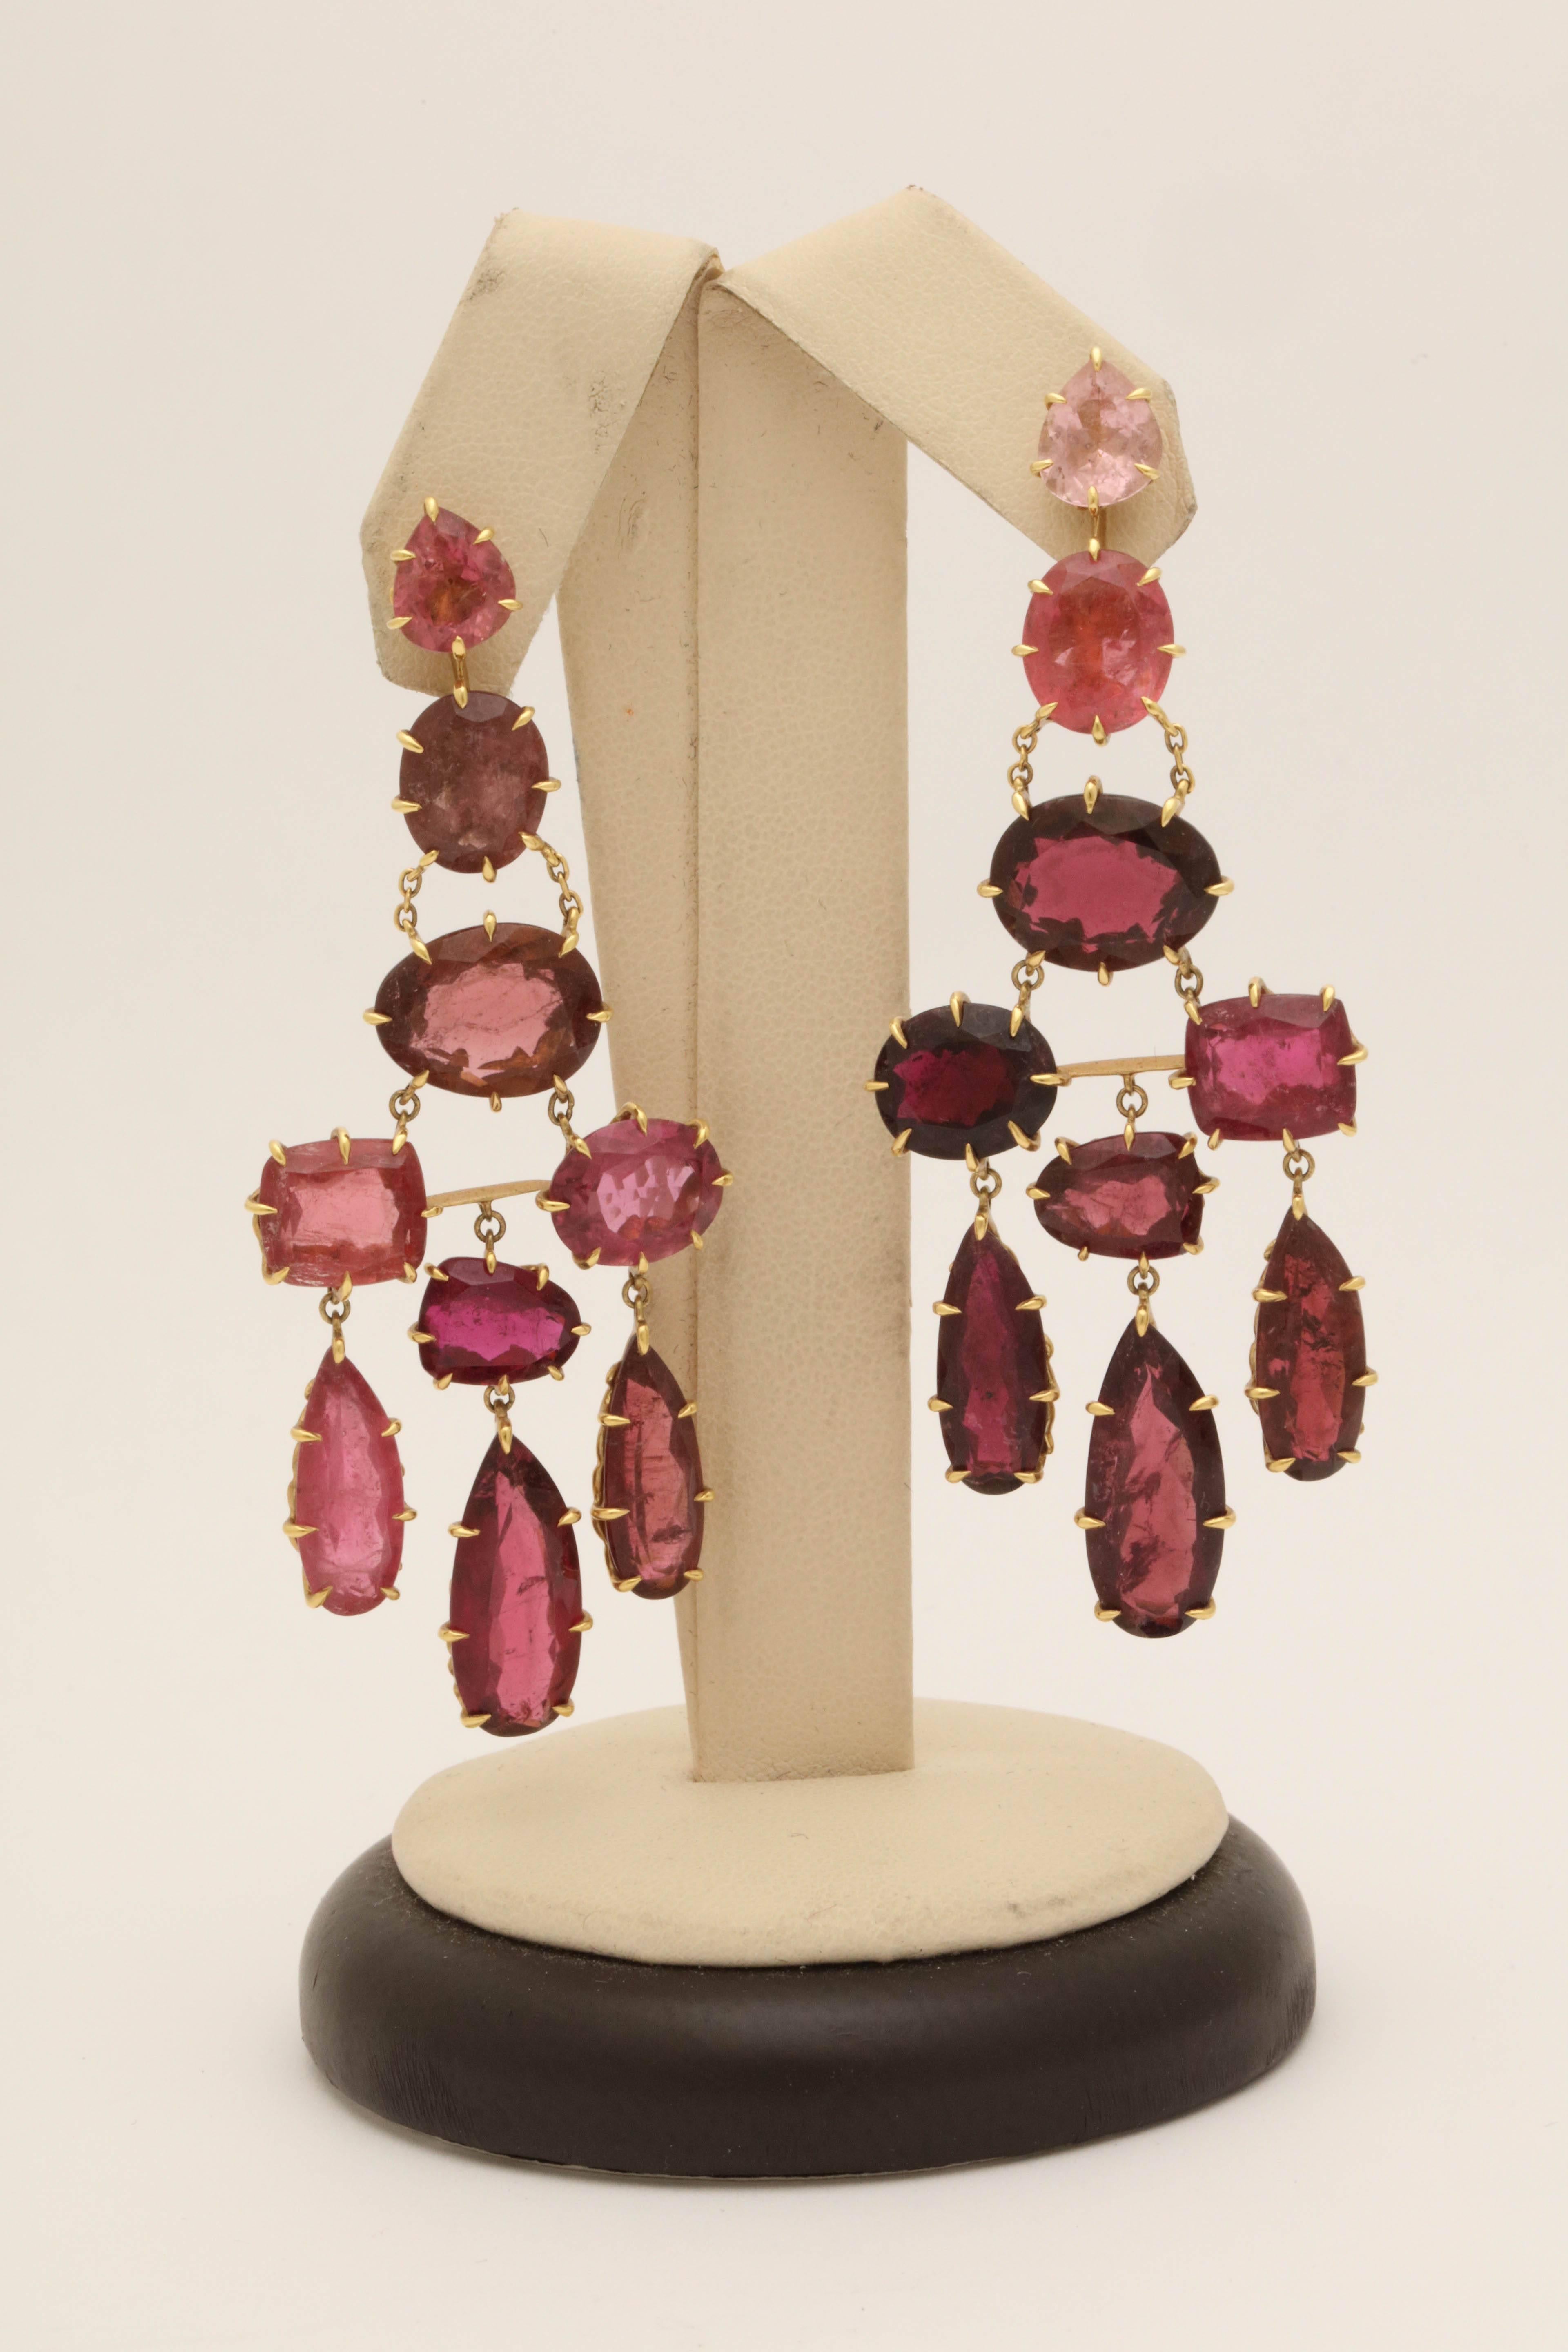 One Pair Of Ladies Flexible And Moveable Earrings Embellished With Numerous Faceted Pink Tourmalines And Faceted Garnet Stones. Each Stone Set In A Beautiful Crown Prong Setting For Extra Security. Total Carat Weight Of All Stones approximately 20